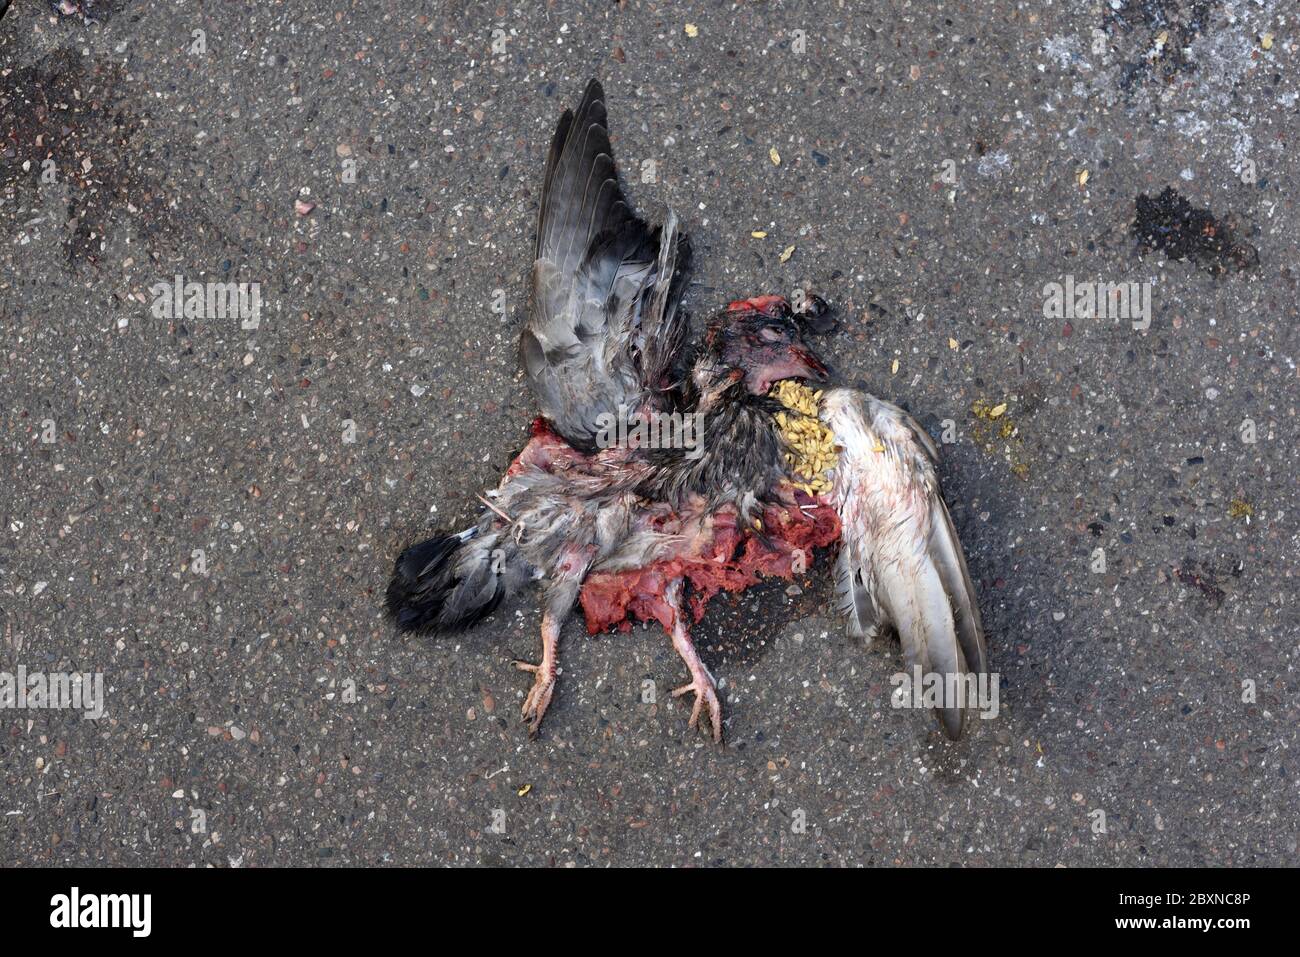 Outline of Dead Pigeon Roadkill  Birdstrike or Bird Hit Squashed on Pavement or Sidewalk Stock Photo